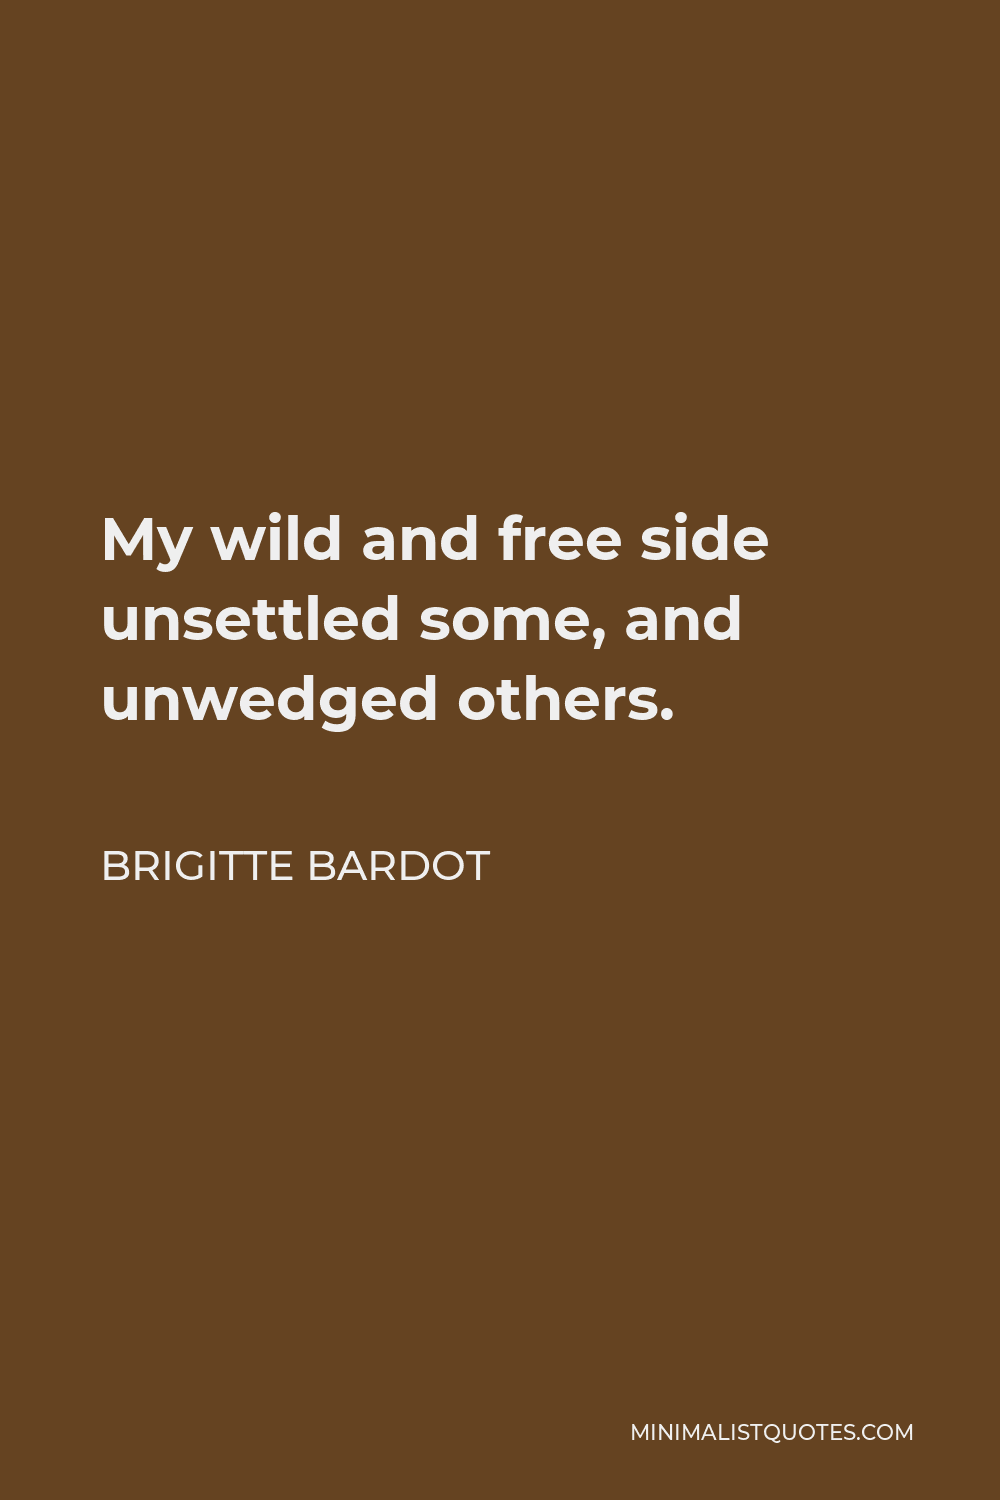 Brigitte Bardot Quote - My wild and free side unsettled some, and unwedged others.